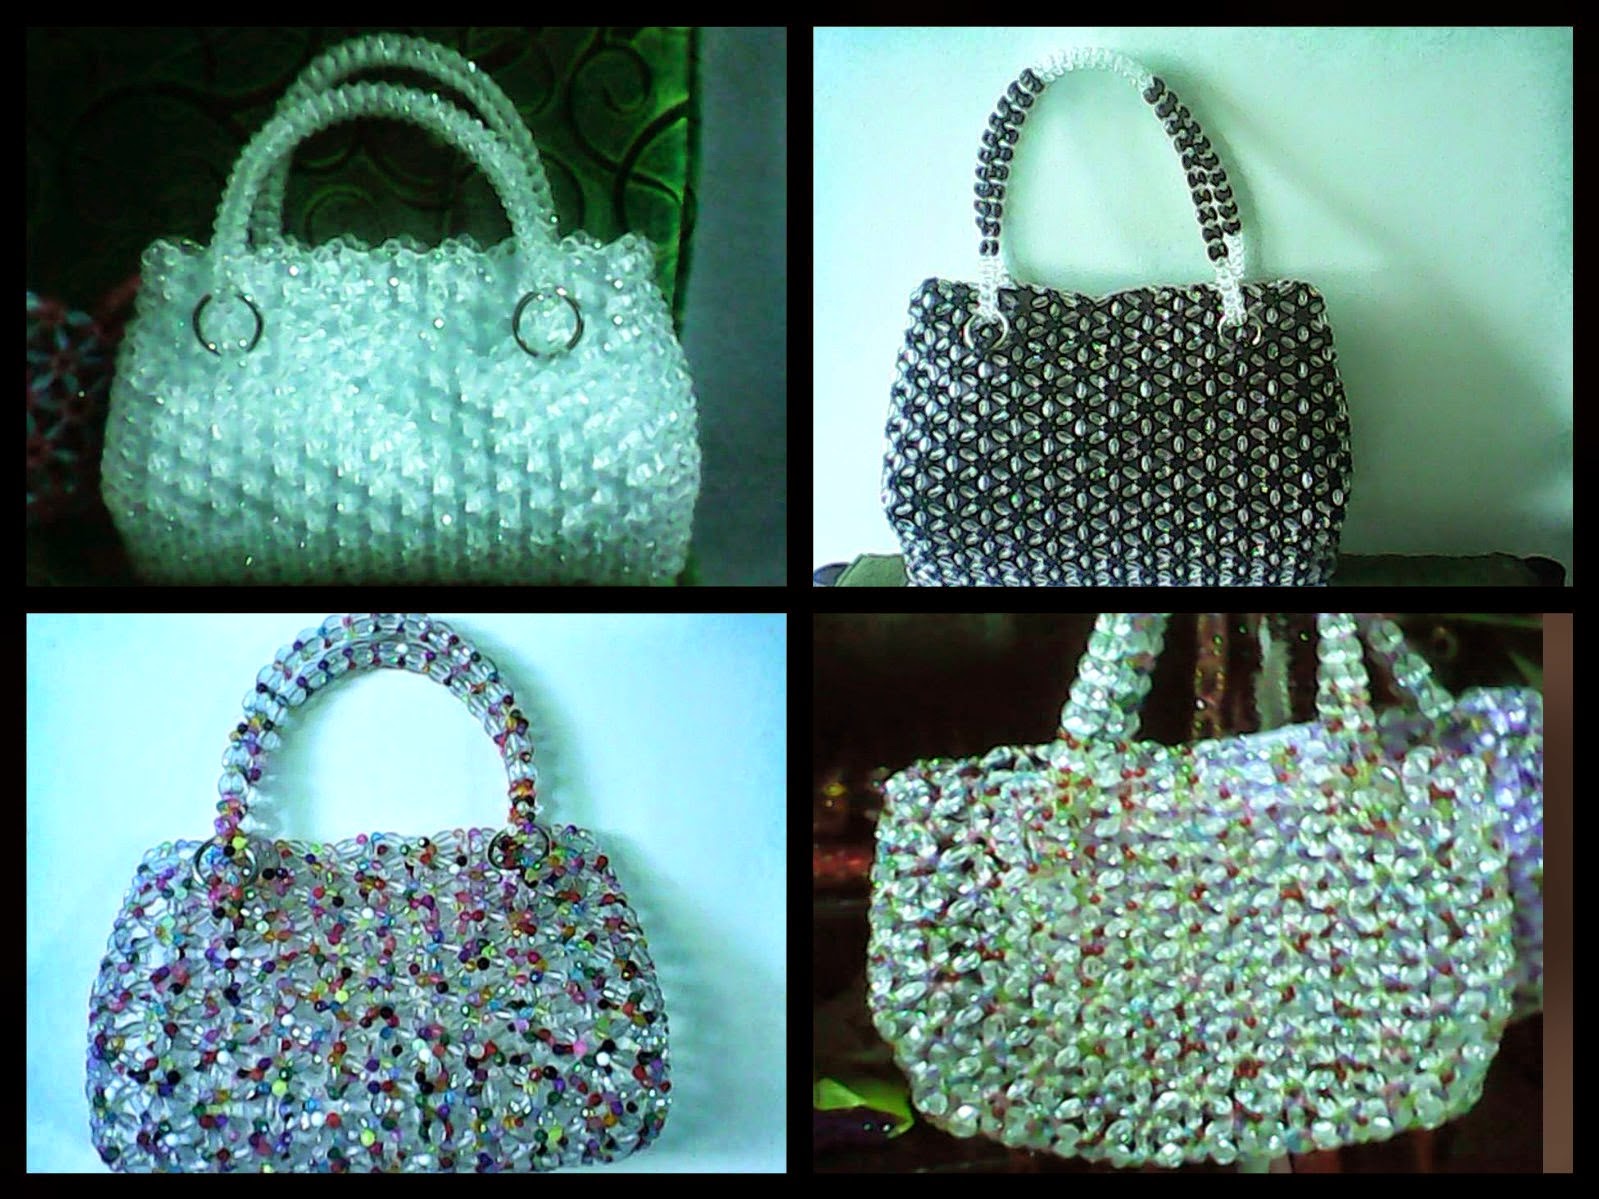 DIY Caft and Arts: Amazing bag designs made of recycled materials